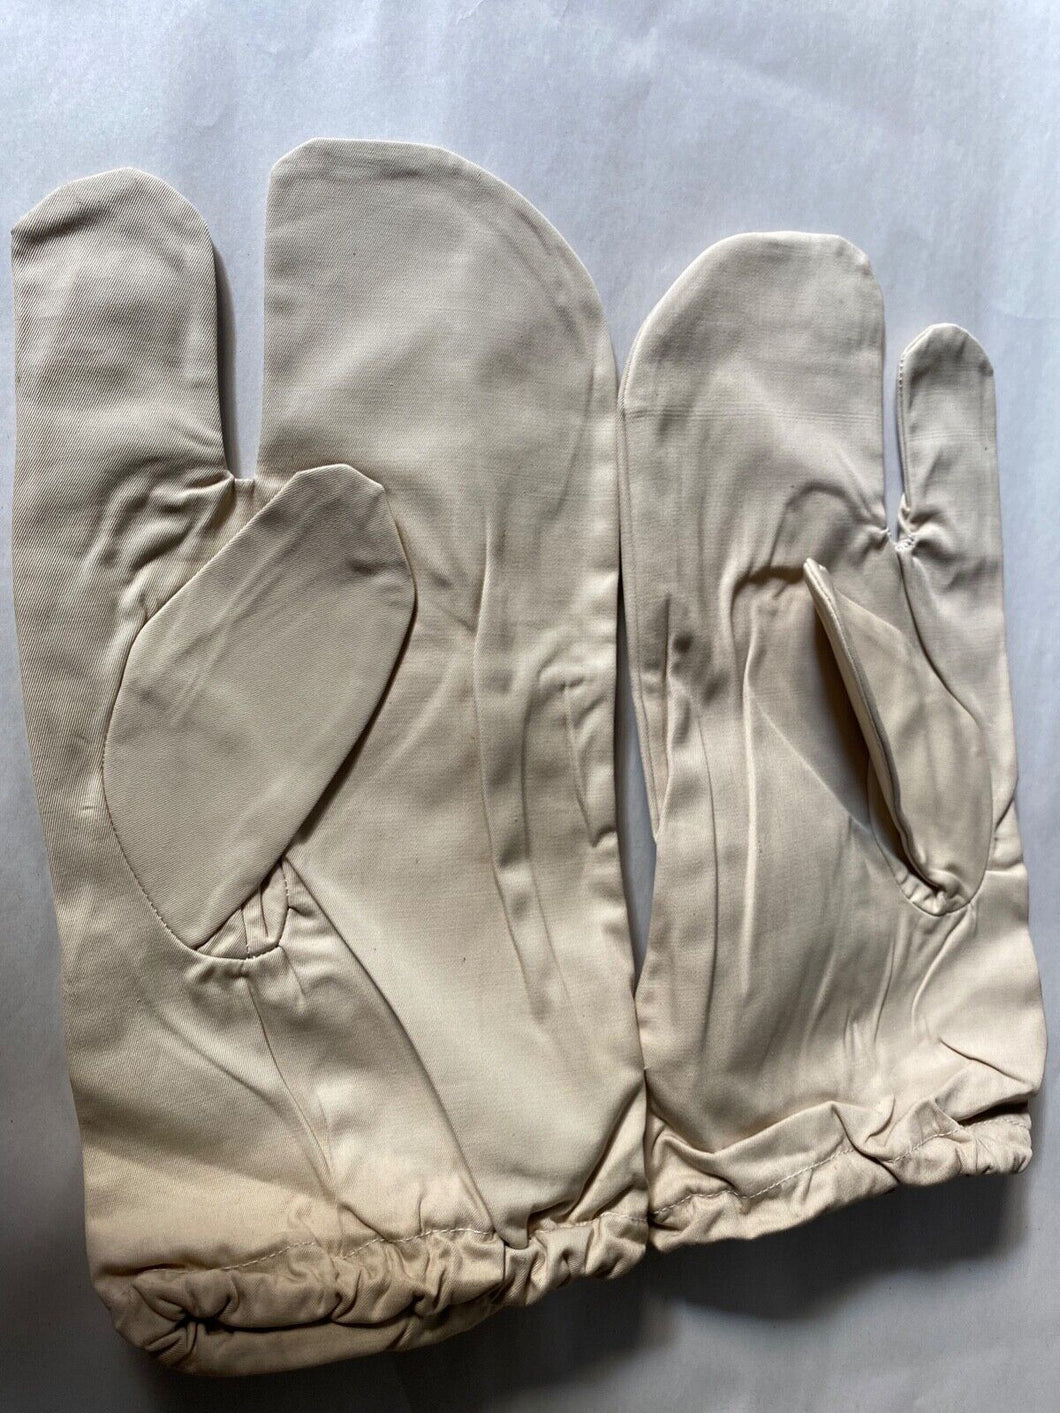 A Matching Pair of WW2 British Army Winter Gunners Gloves - Manufacturers marked